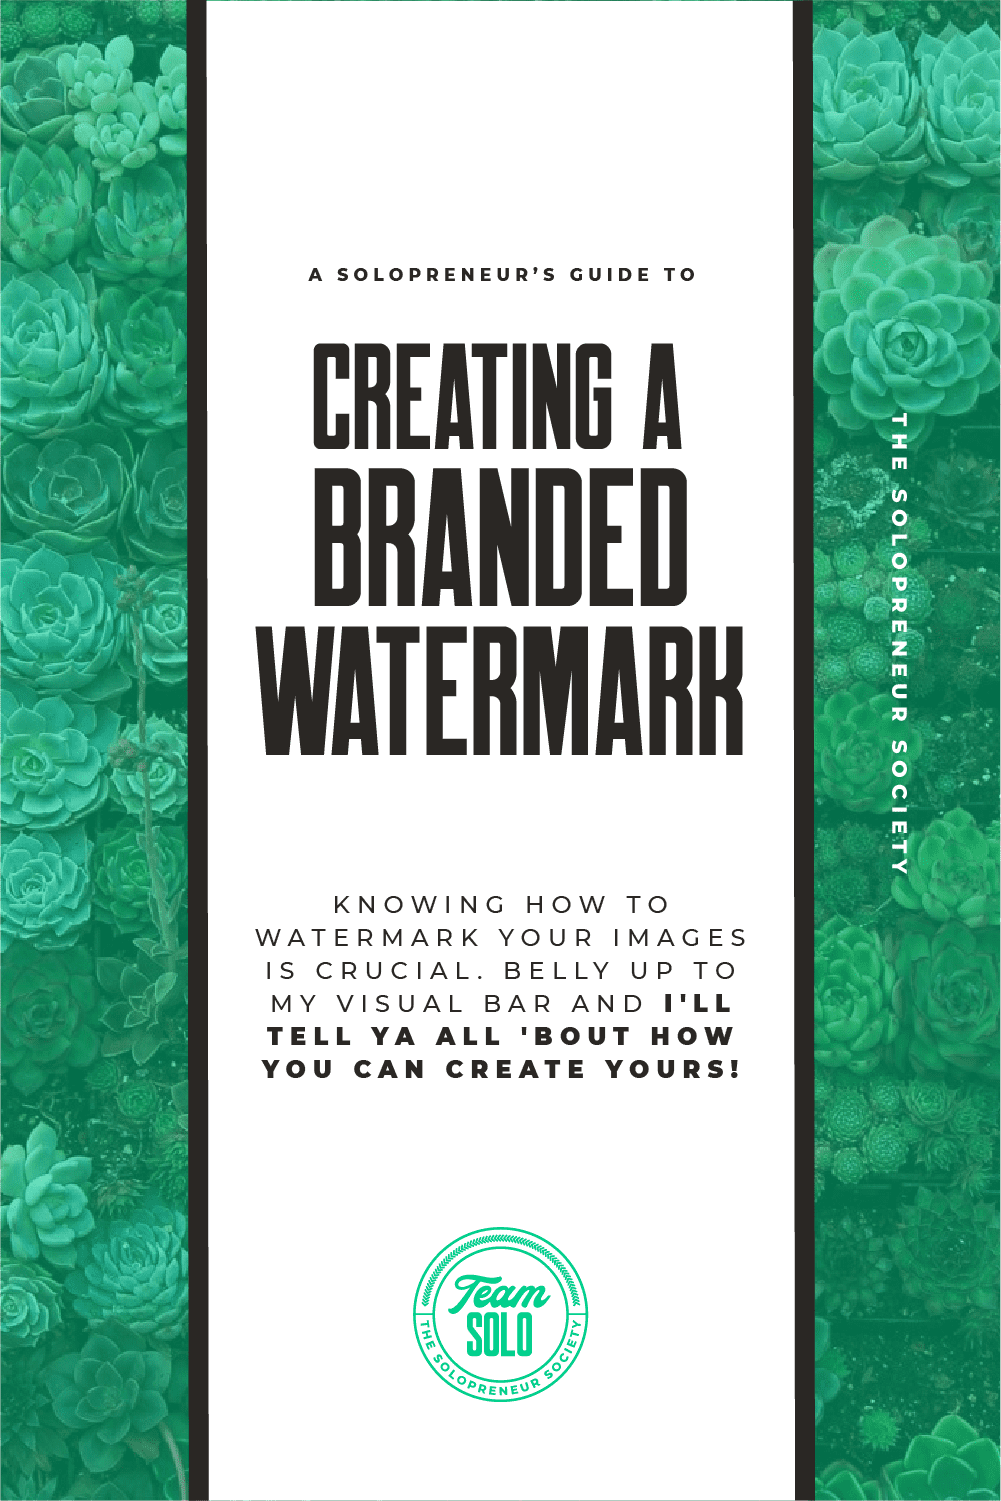 A Solopreneur’s Guide To Creating A Branded Watermark